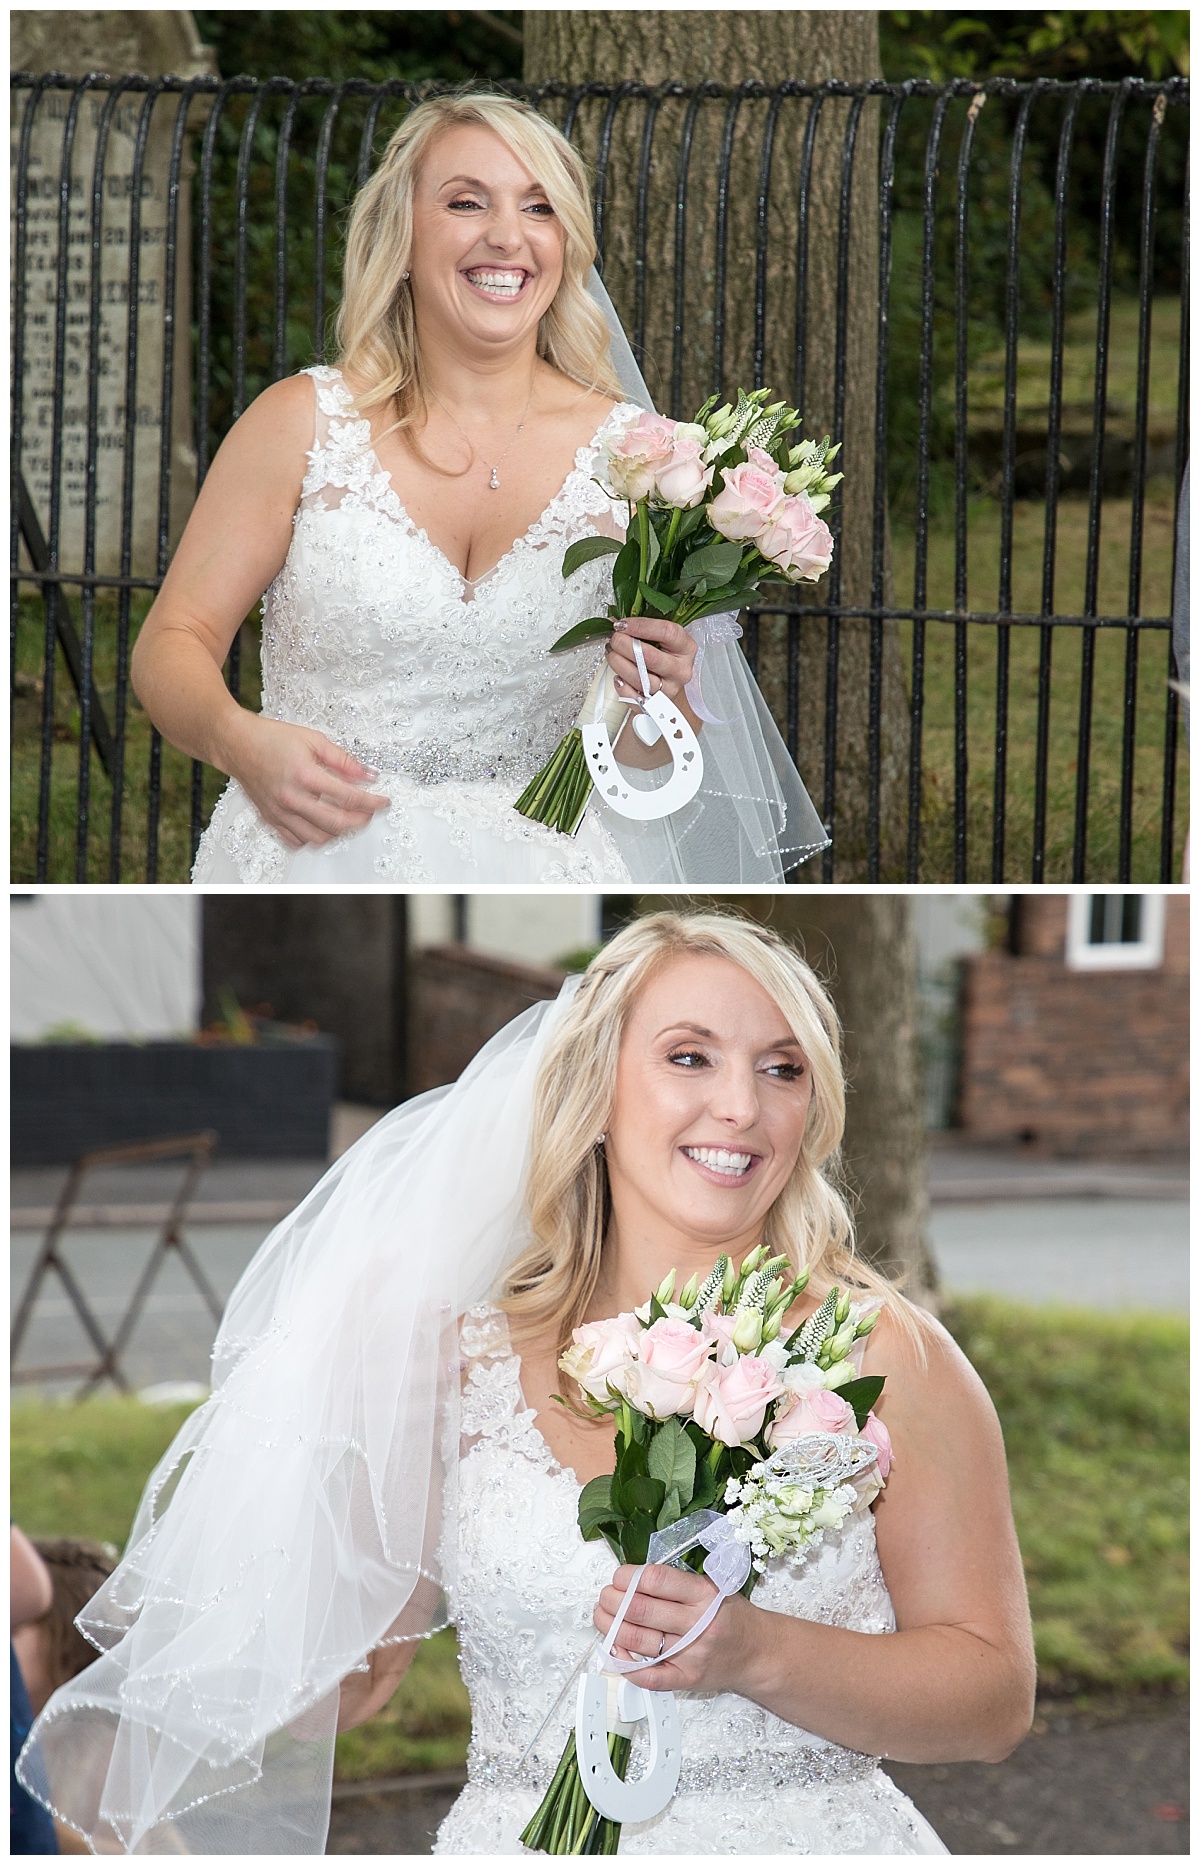 Wedding Photography Manchester - Lisa and James's The Three Horseshoes Country Inn wedding 19